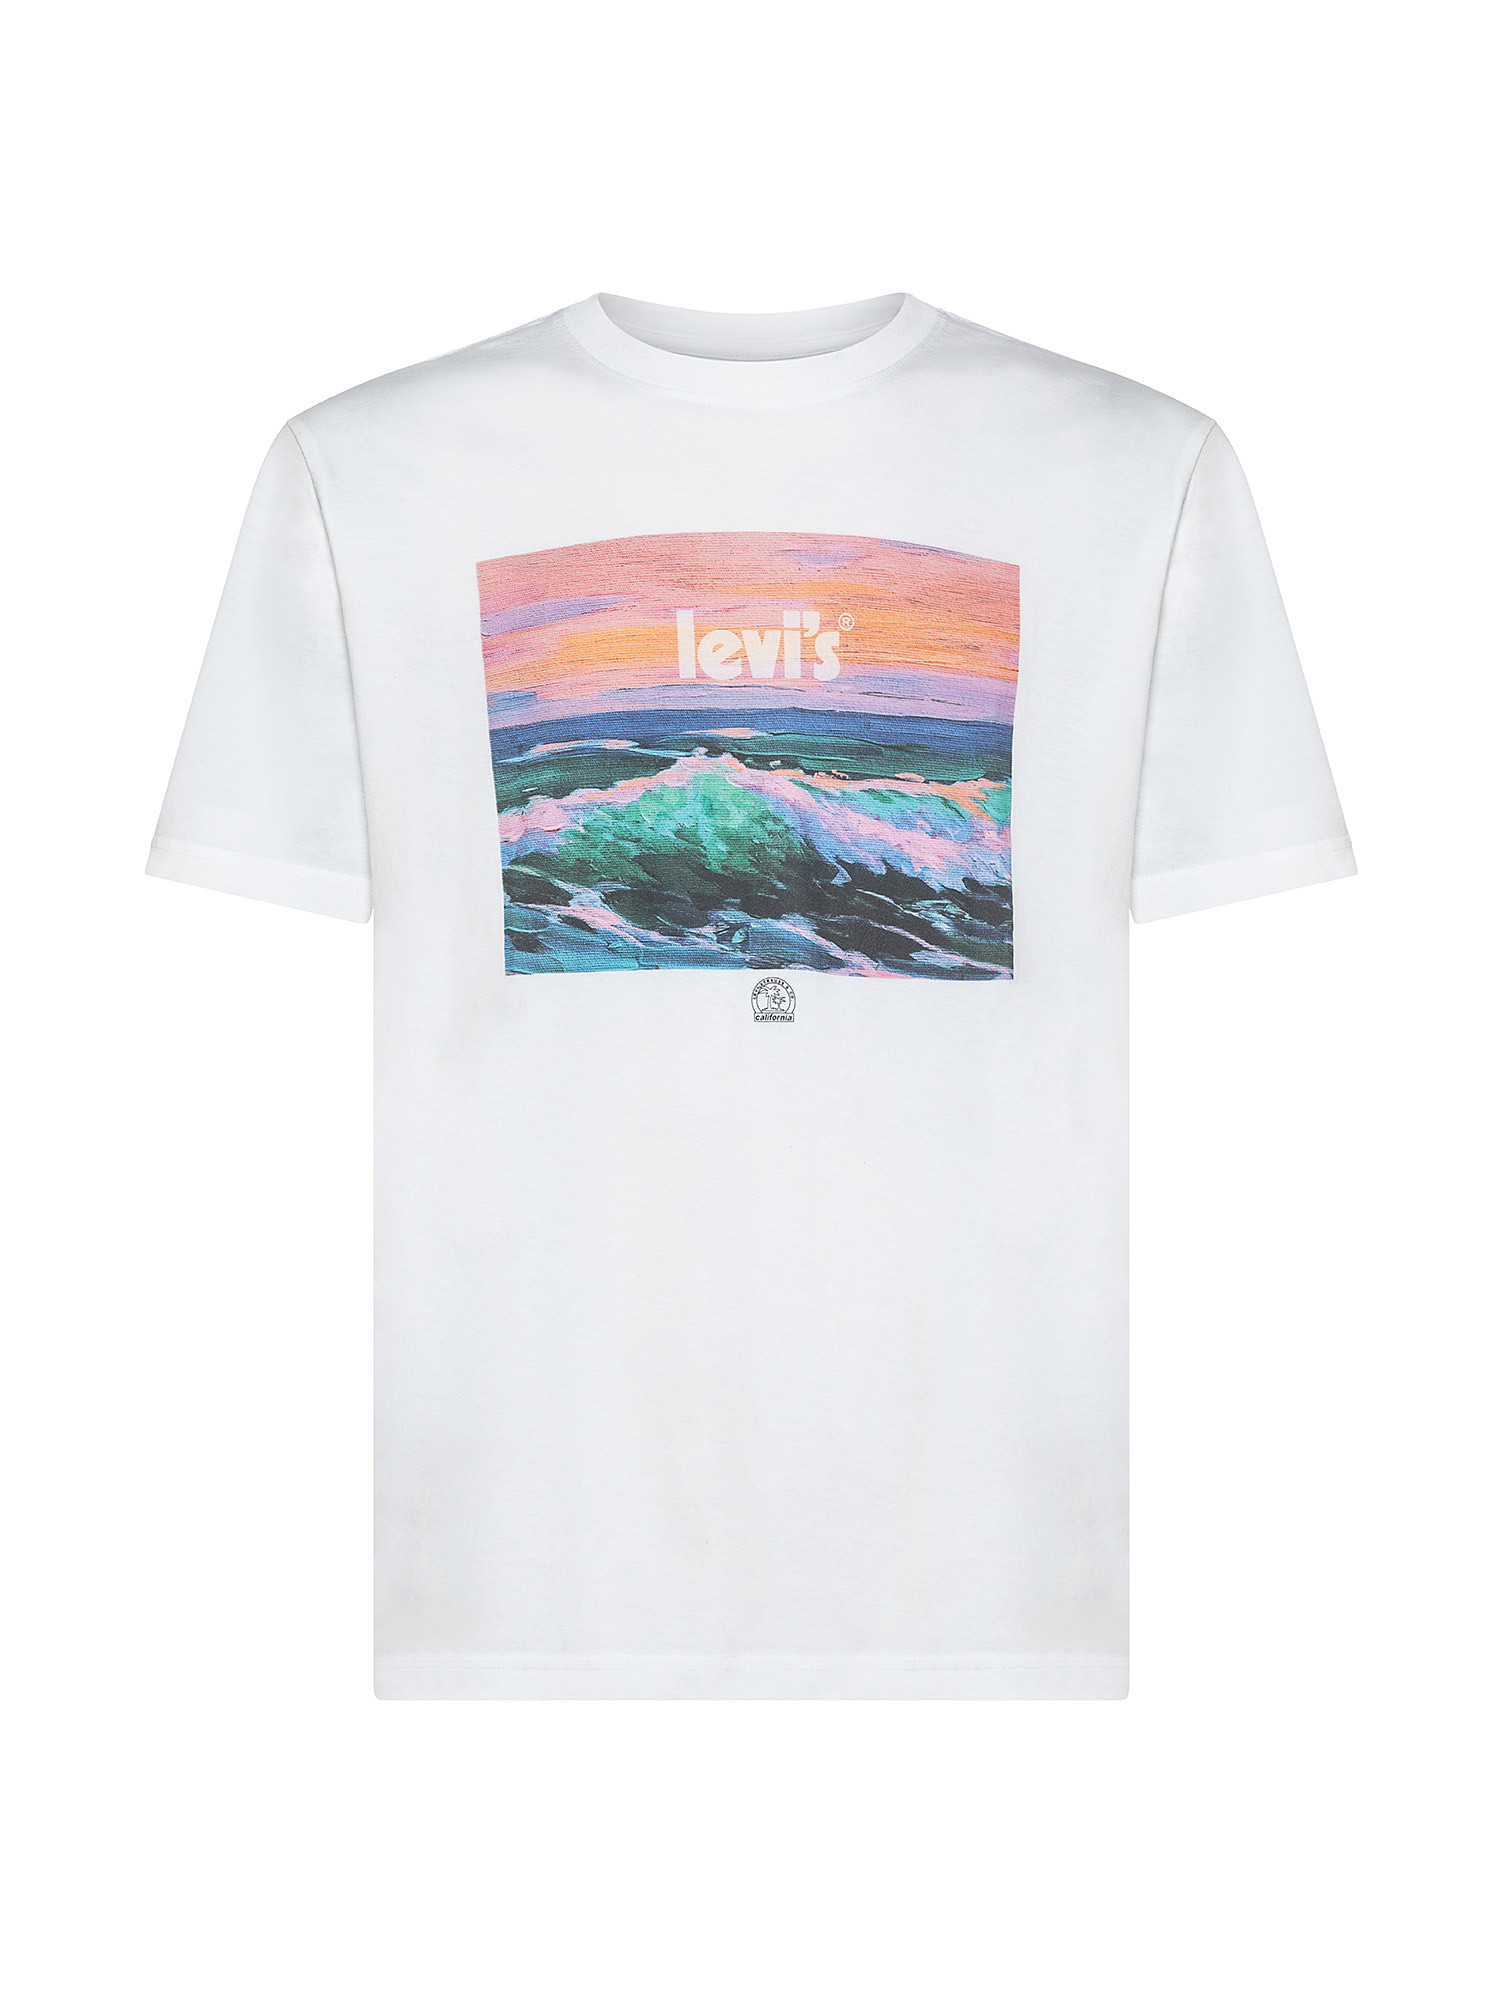 Graphic Tee, White, large image number 0